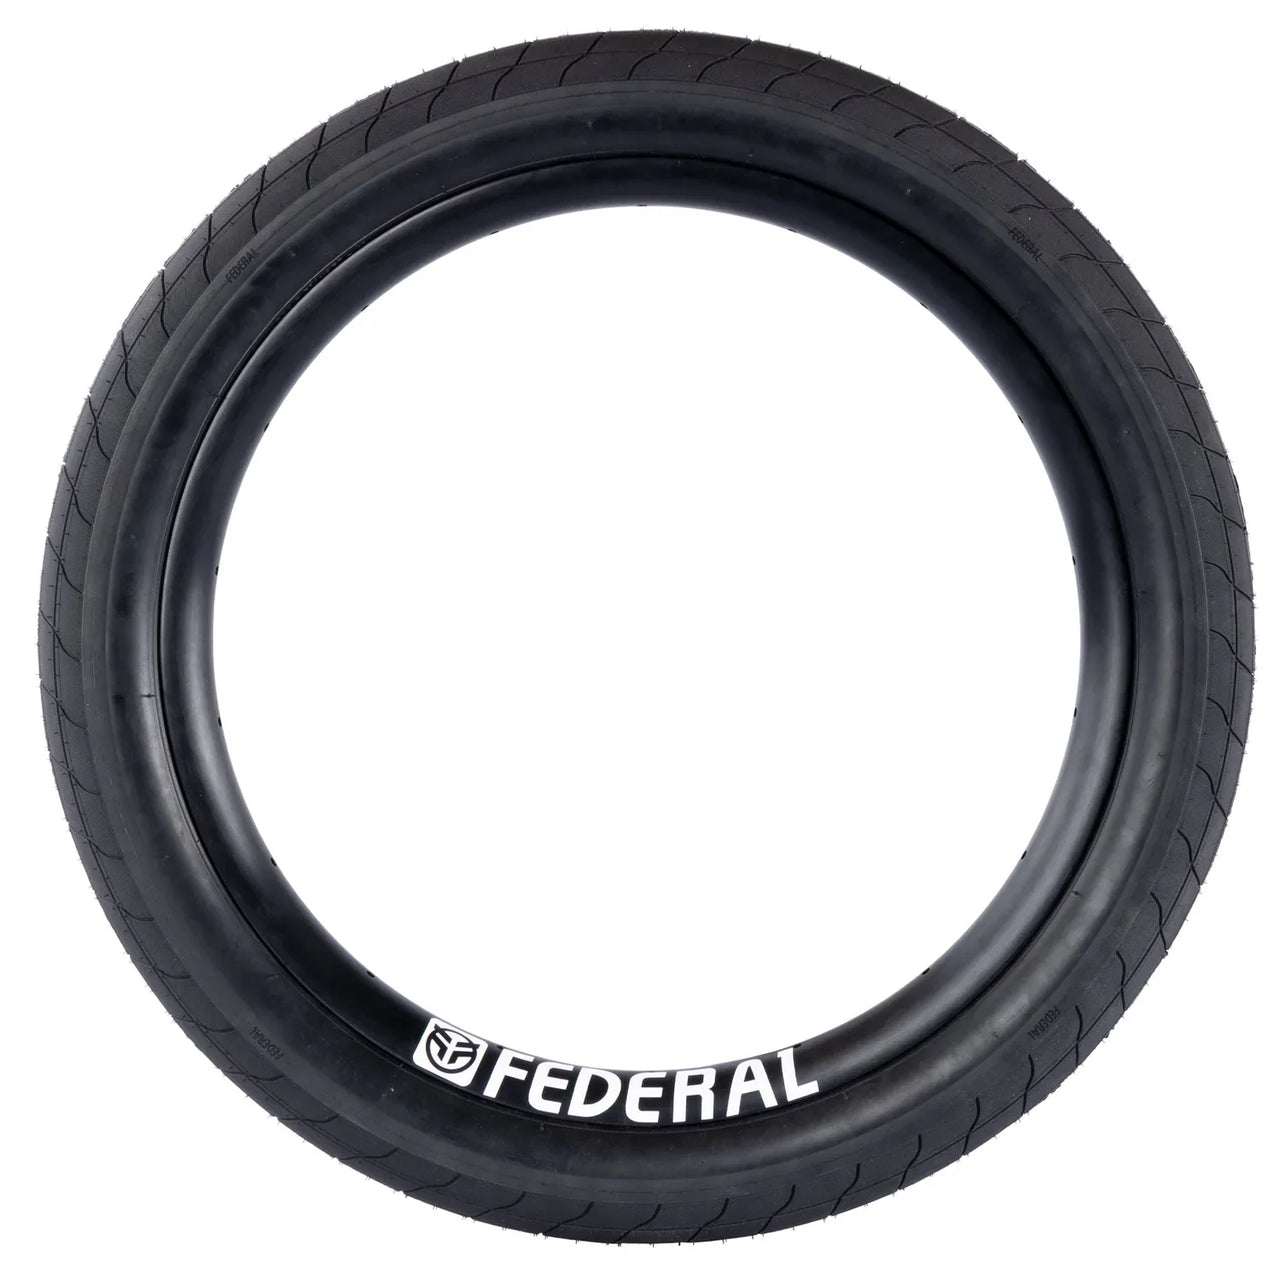 Federal Neptune Tyre